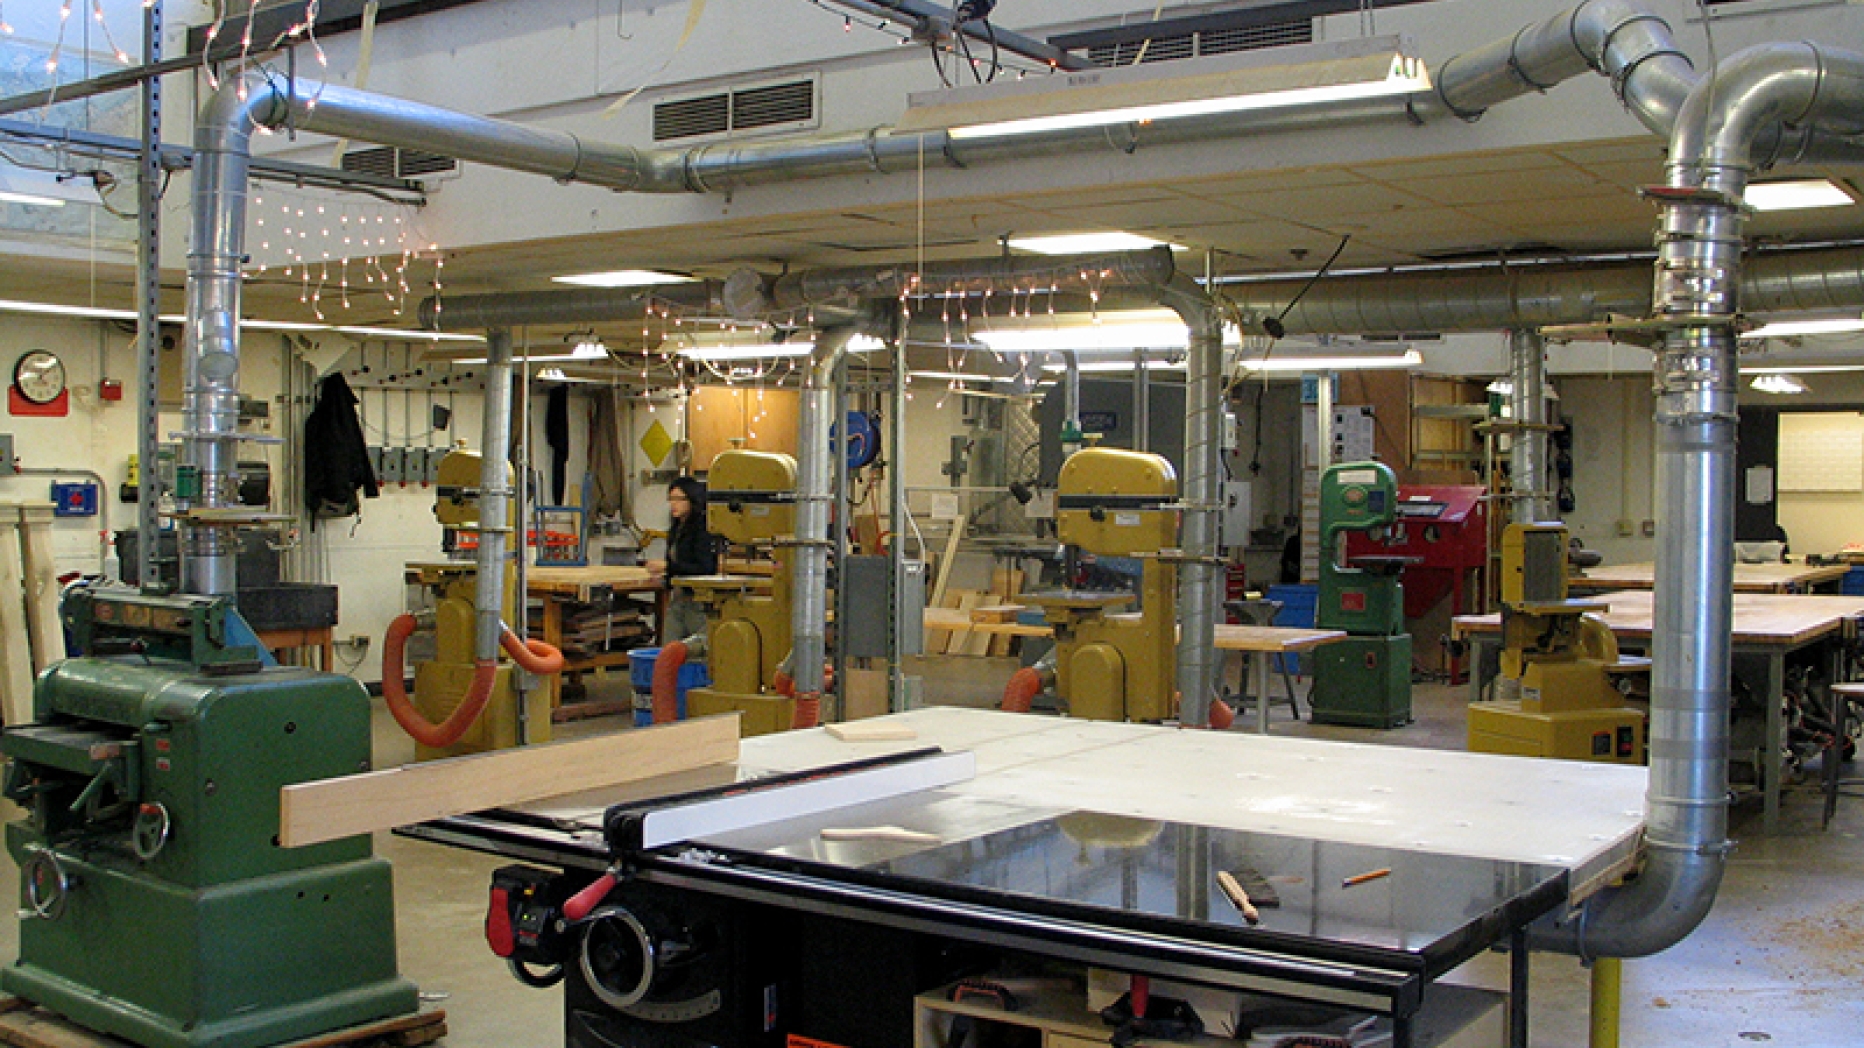 Unoccupied fabrication lab with a variety of machine tools spread throughout the lab